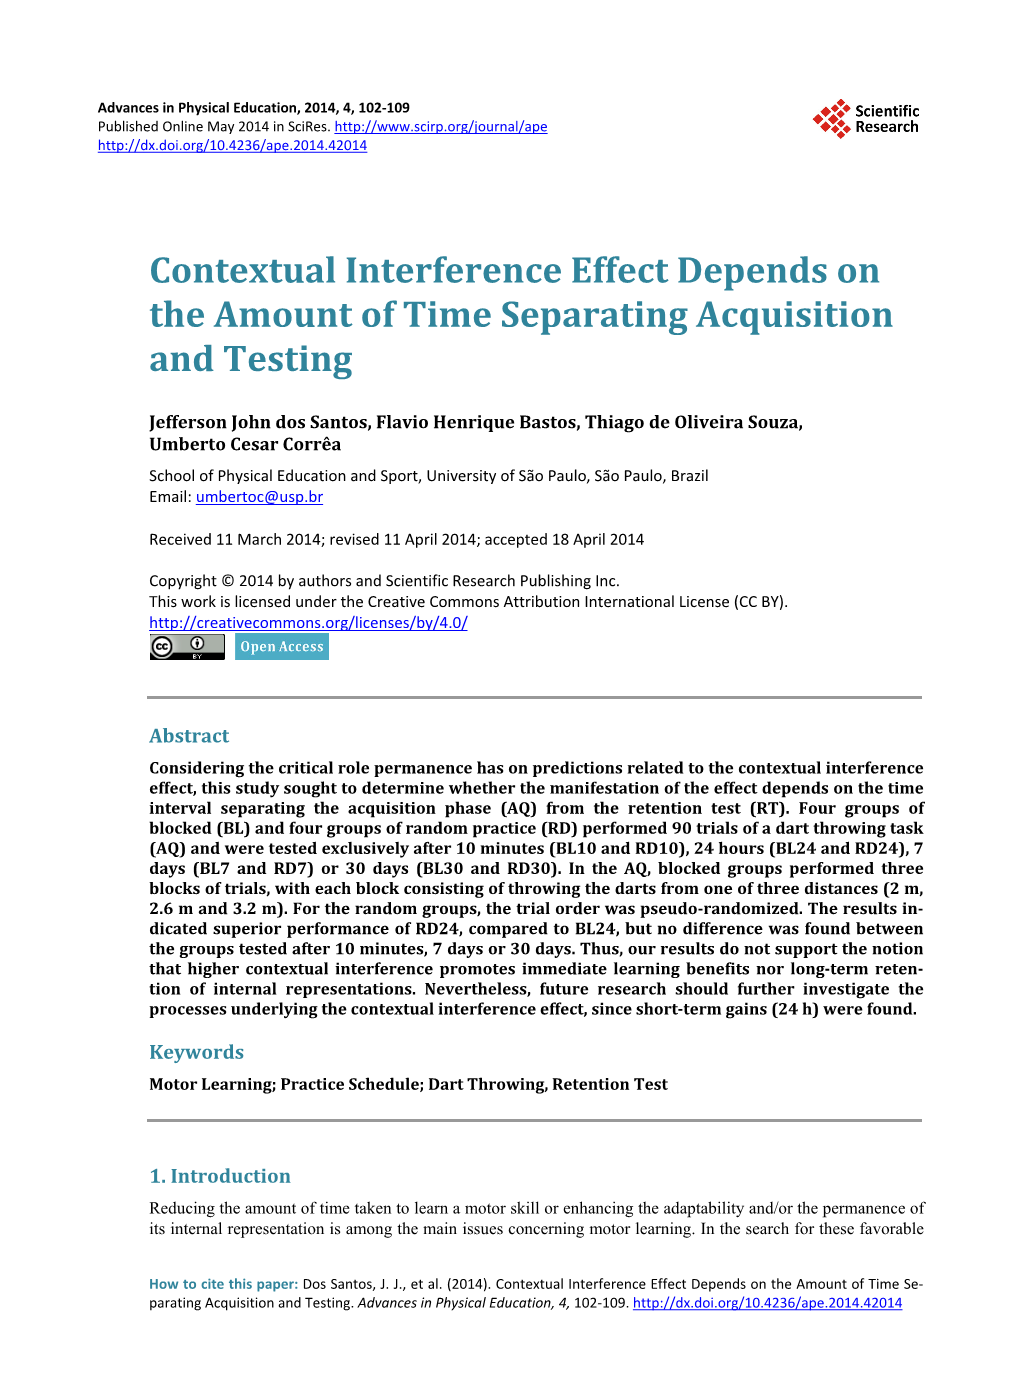 Contextual Interference Effect Depends on the Amount of Time Separating Acquisition and Testing